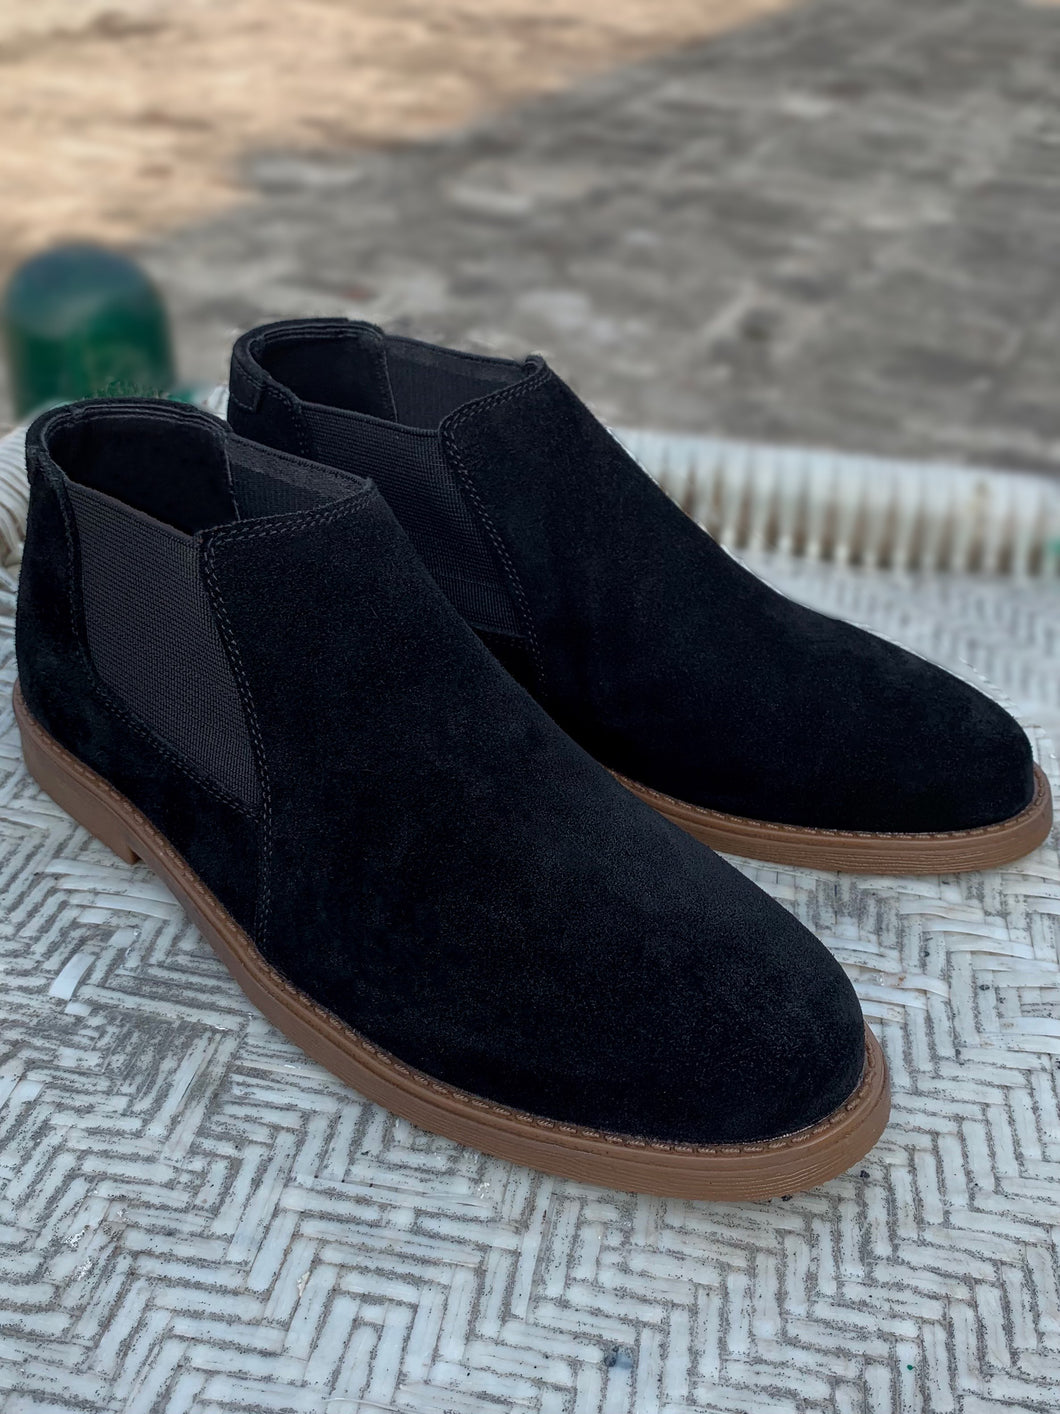 Black Suede Leather Low Cut Chelsea Boots